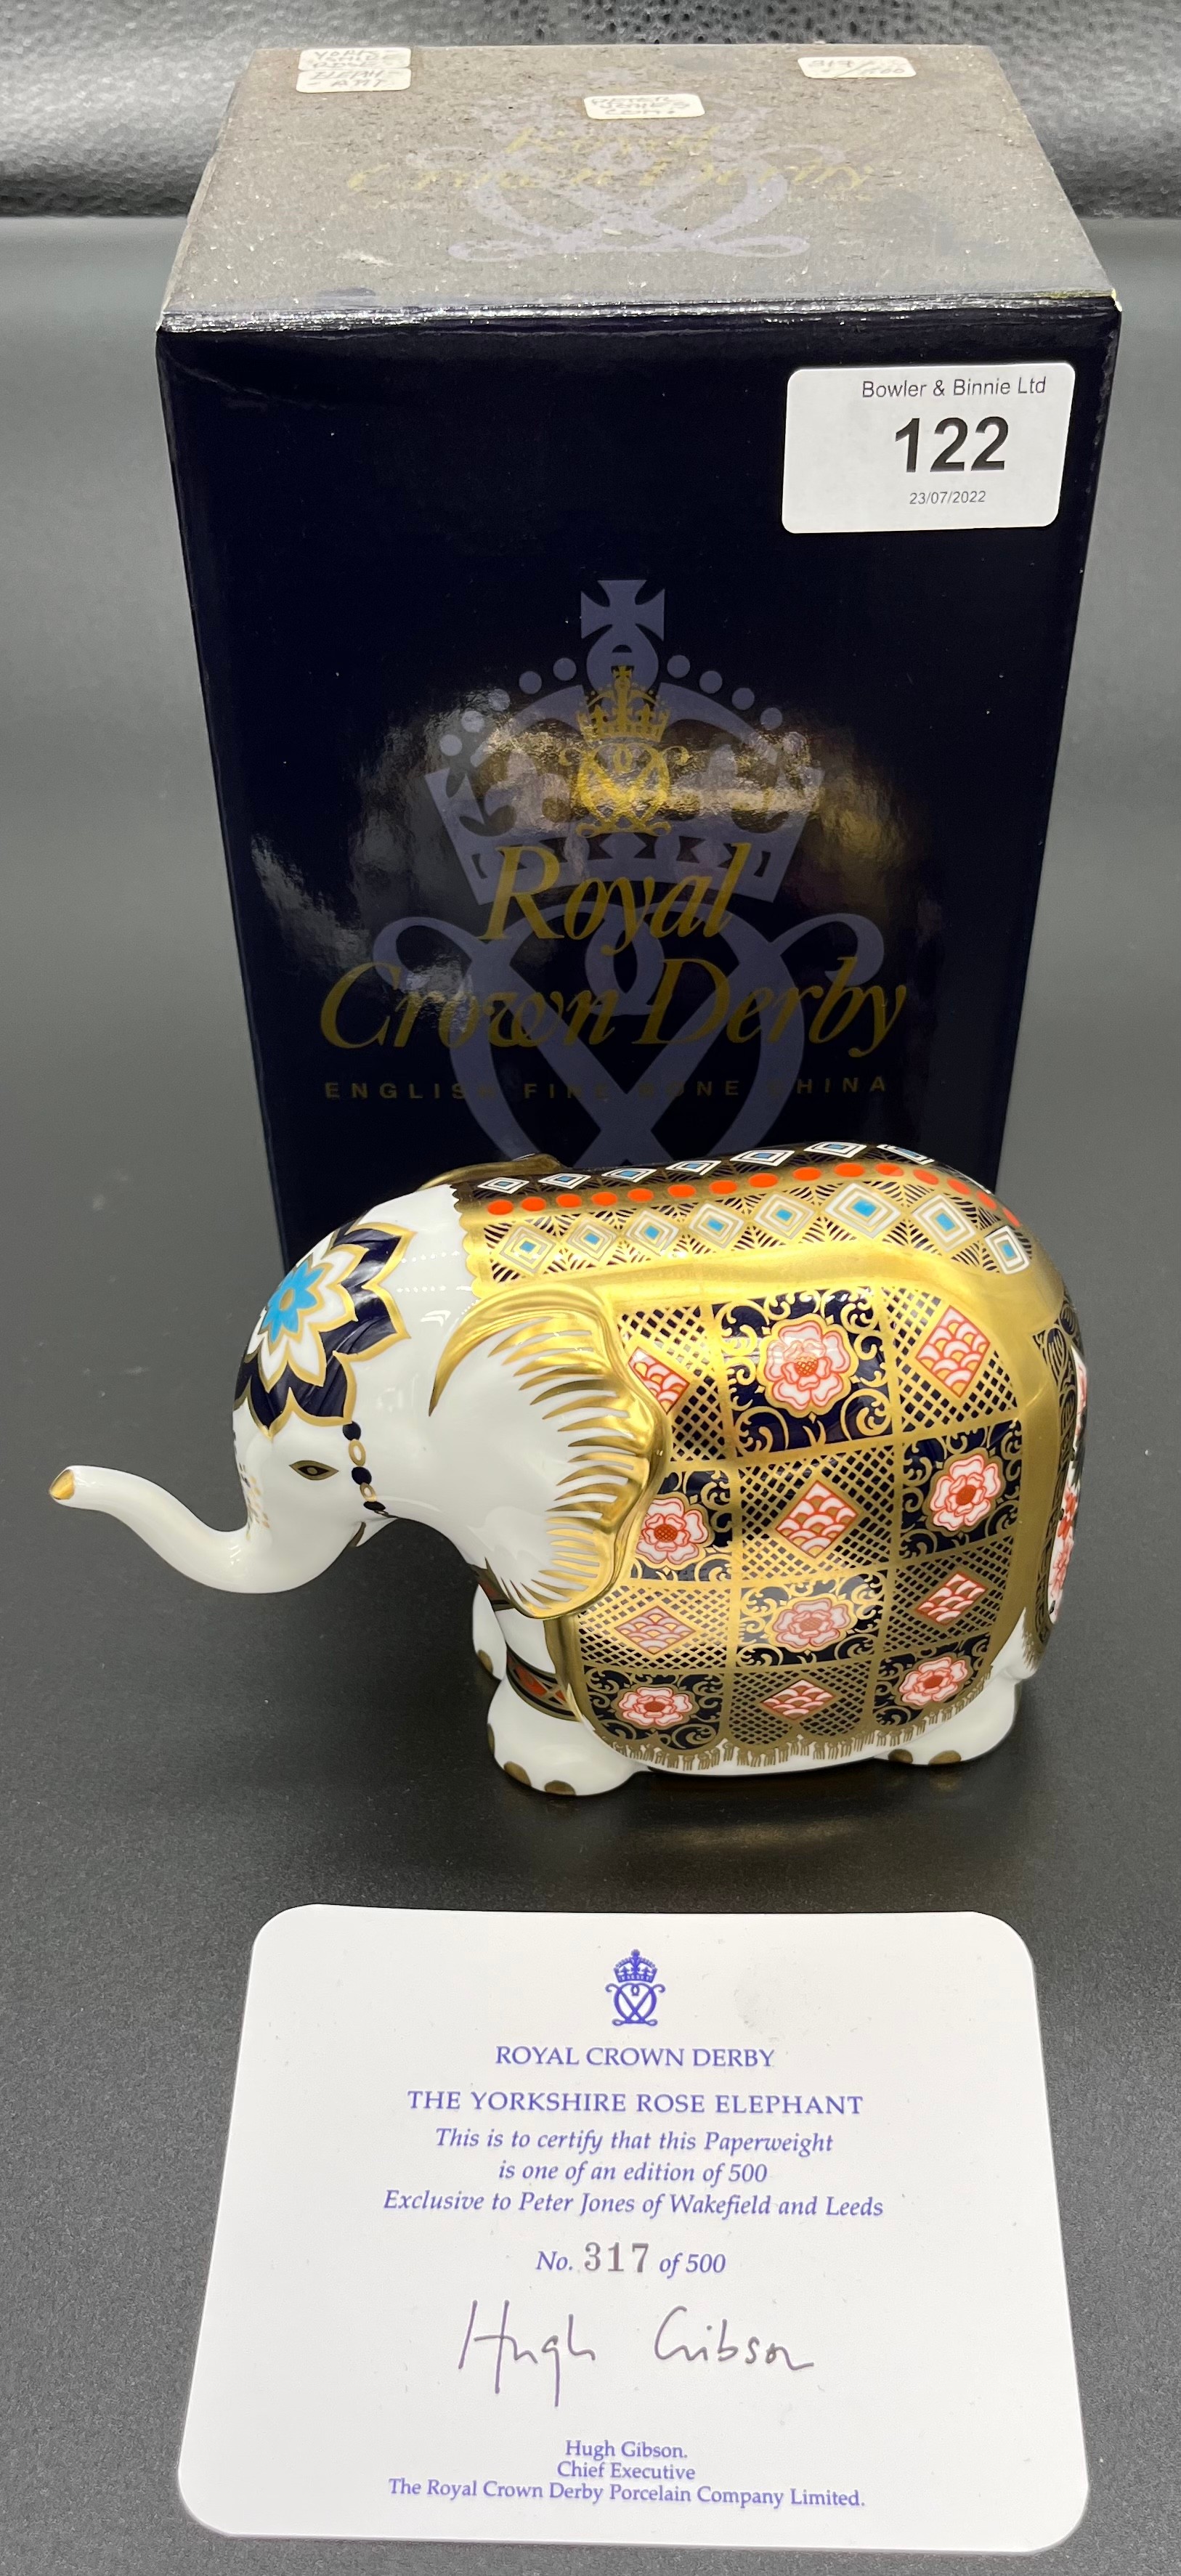 Royal Crown Derby paperweight 'The Yorkshire Rose Elephant' Limited edition 317 of 500. Comes with